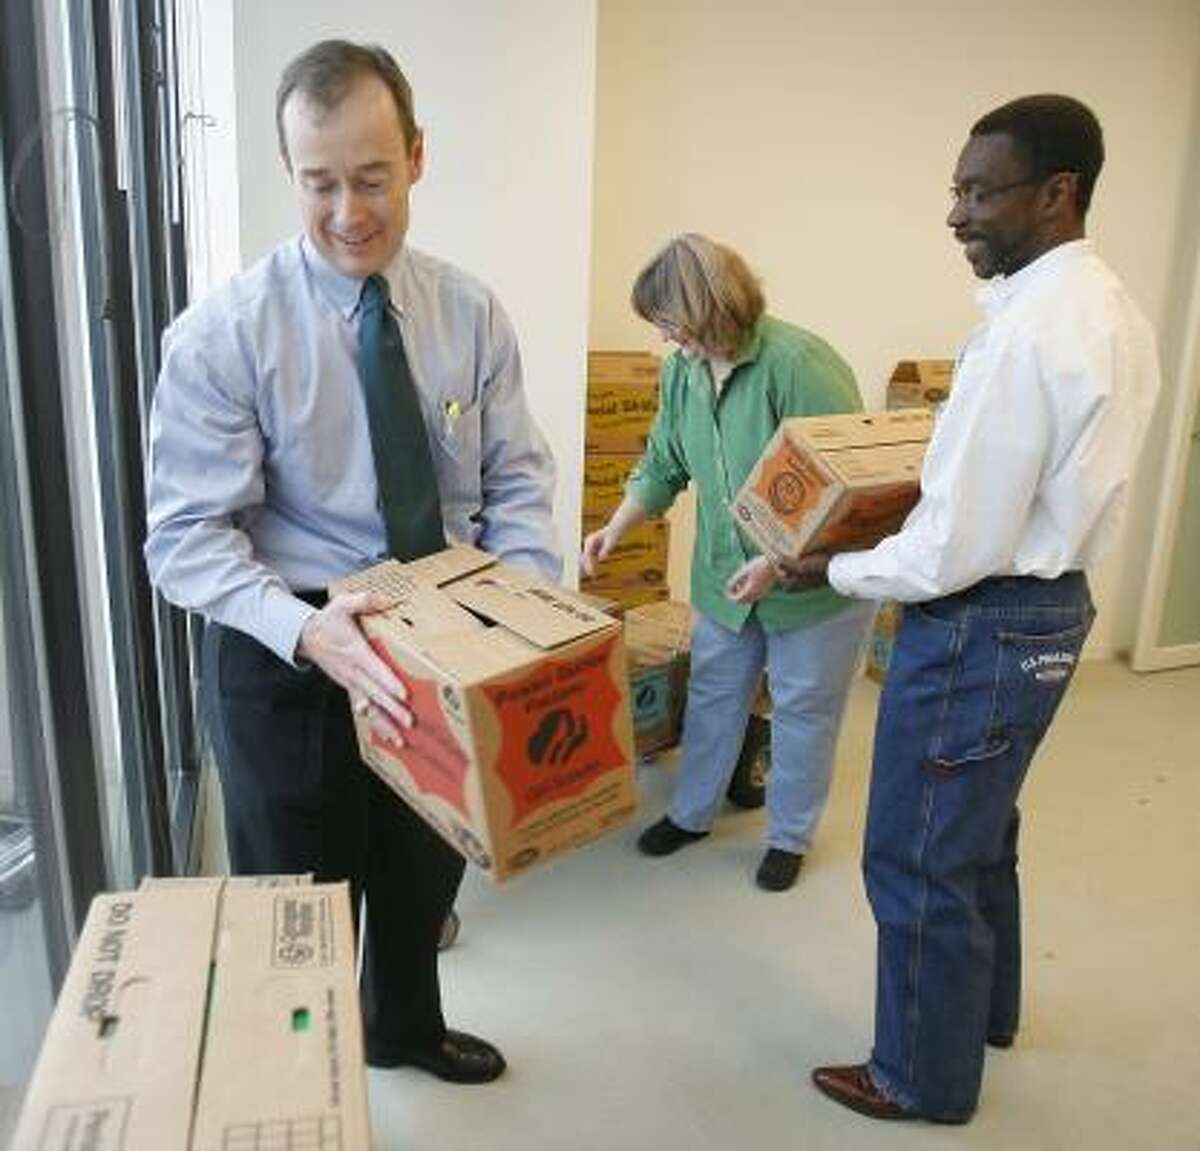 Don Jackson, left, a Haynes and Boone lawyer, unloads cases of cookies with the help of Tommy Thomas of the firm's office services and legal secretary Donene Olmstead.